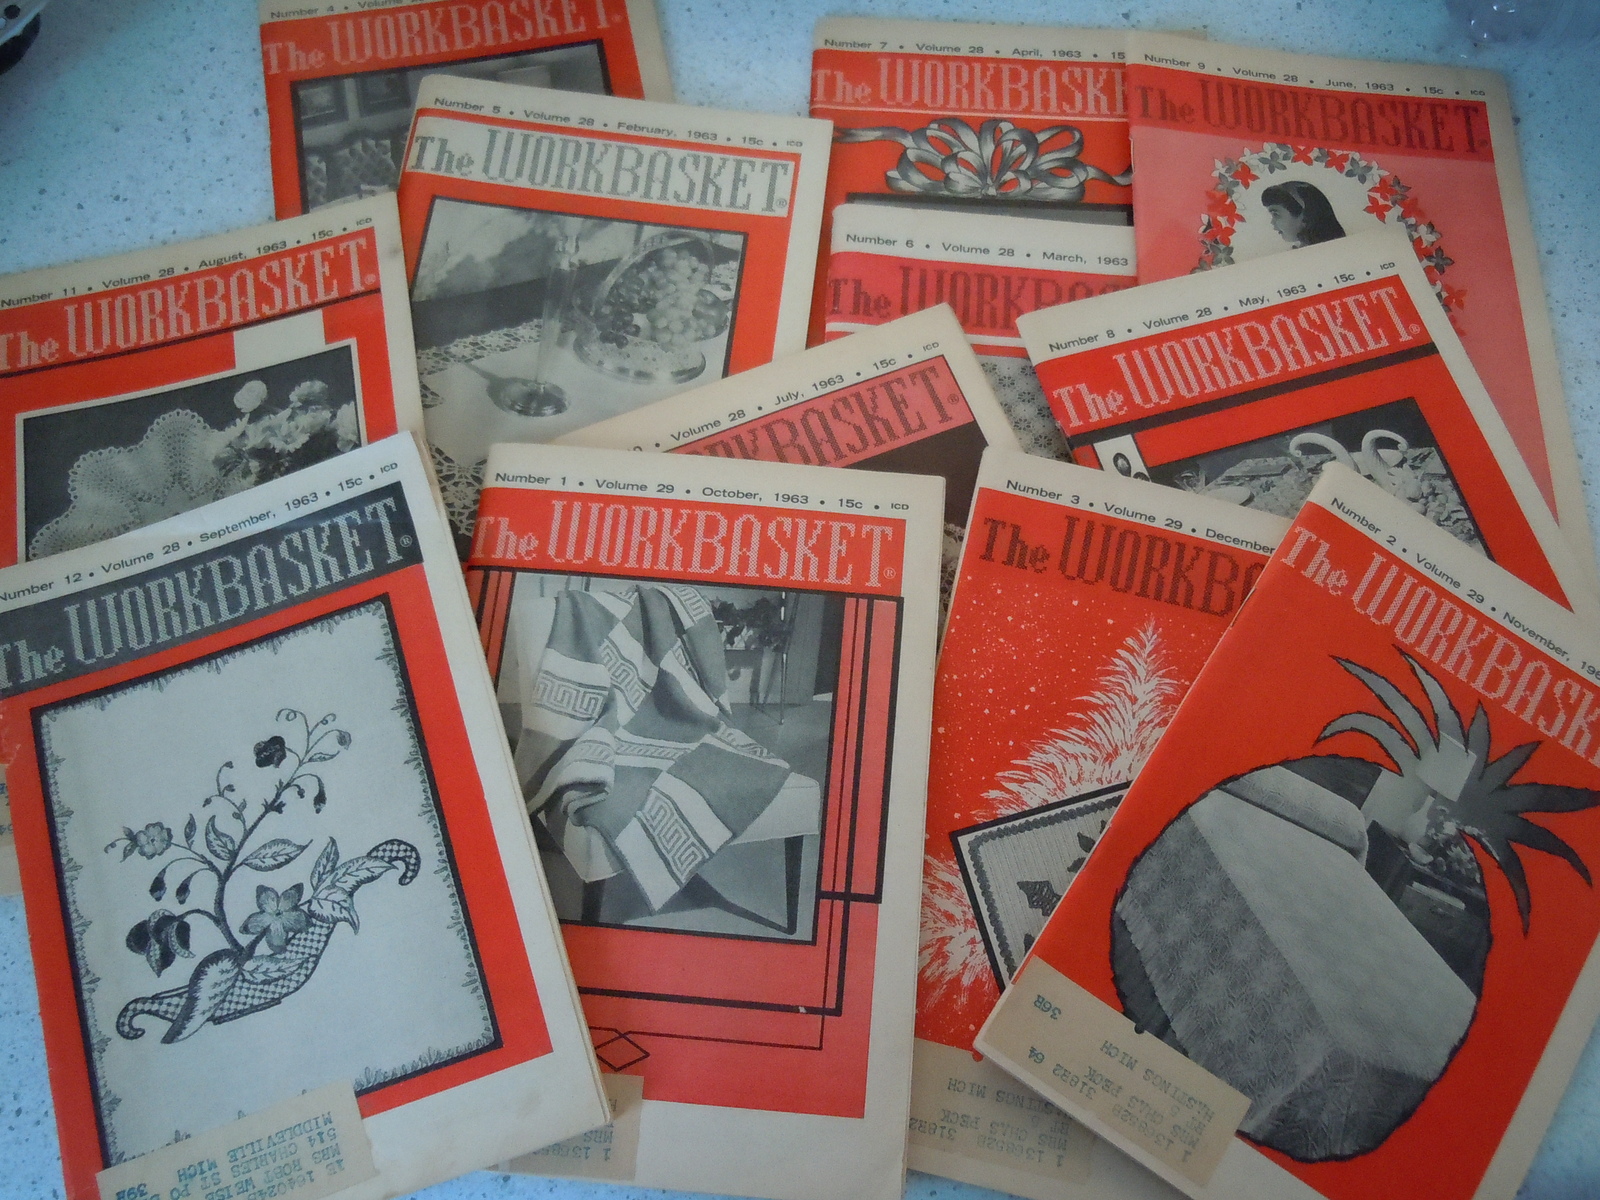 The Workbasket 1963 Craft Magazines 12 Issues - $9.99